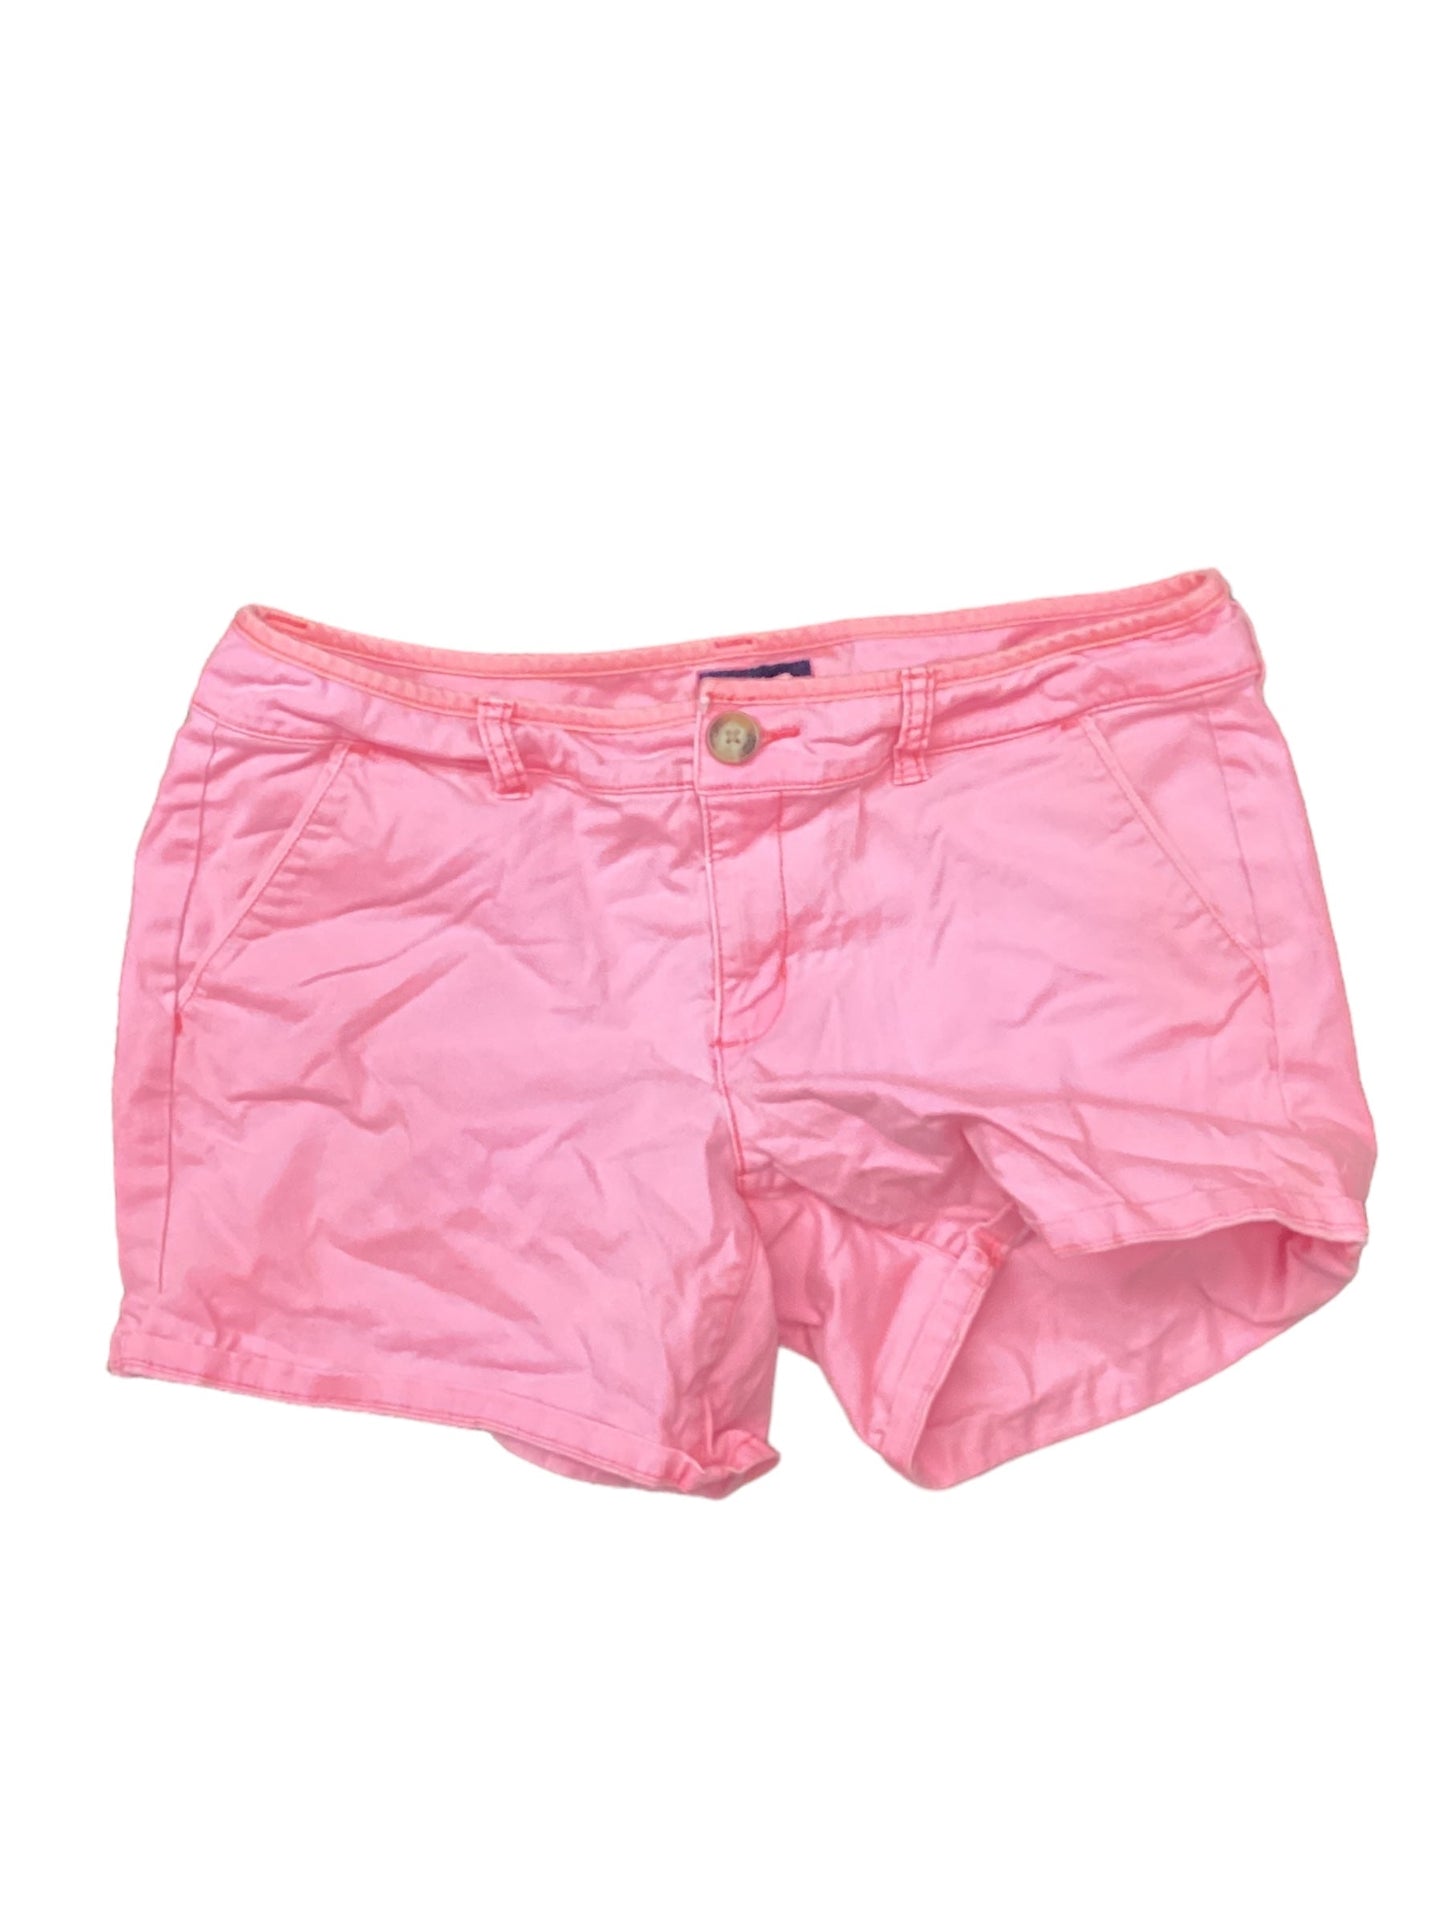 Pink Shorts American Eagle, Size 10